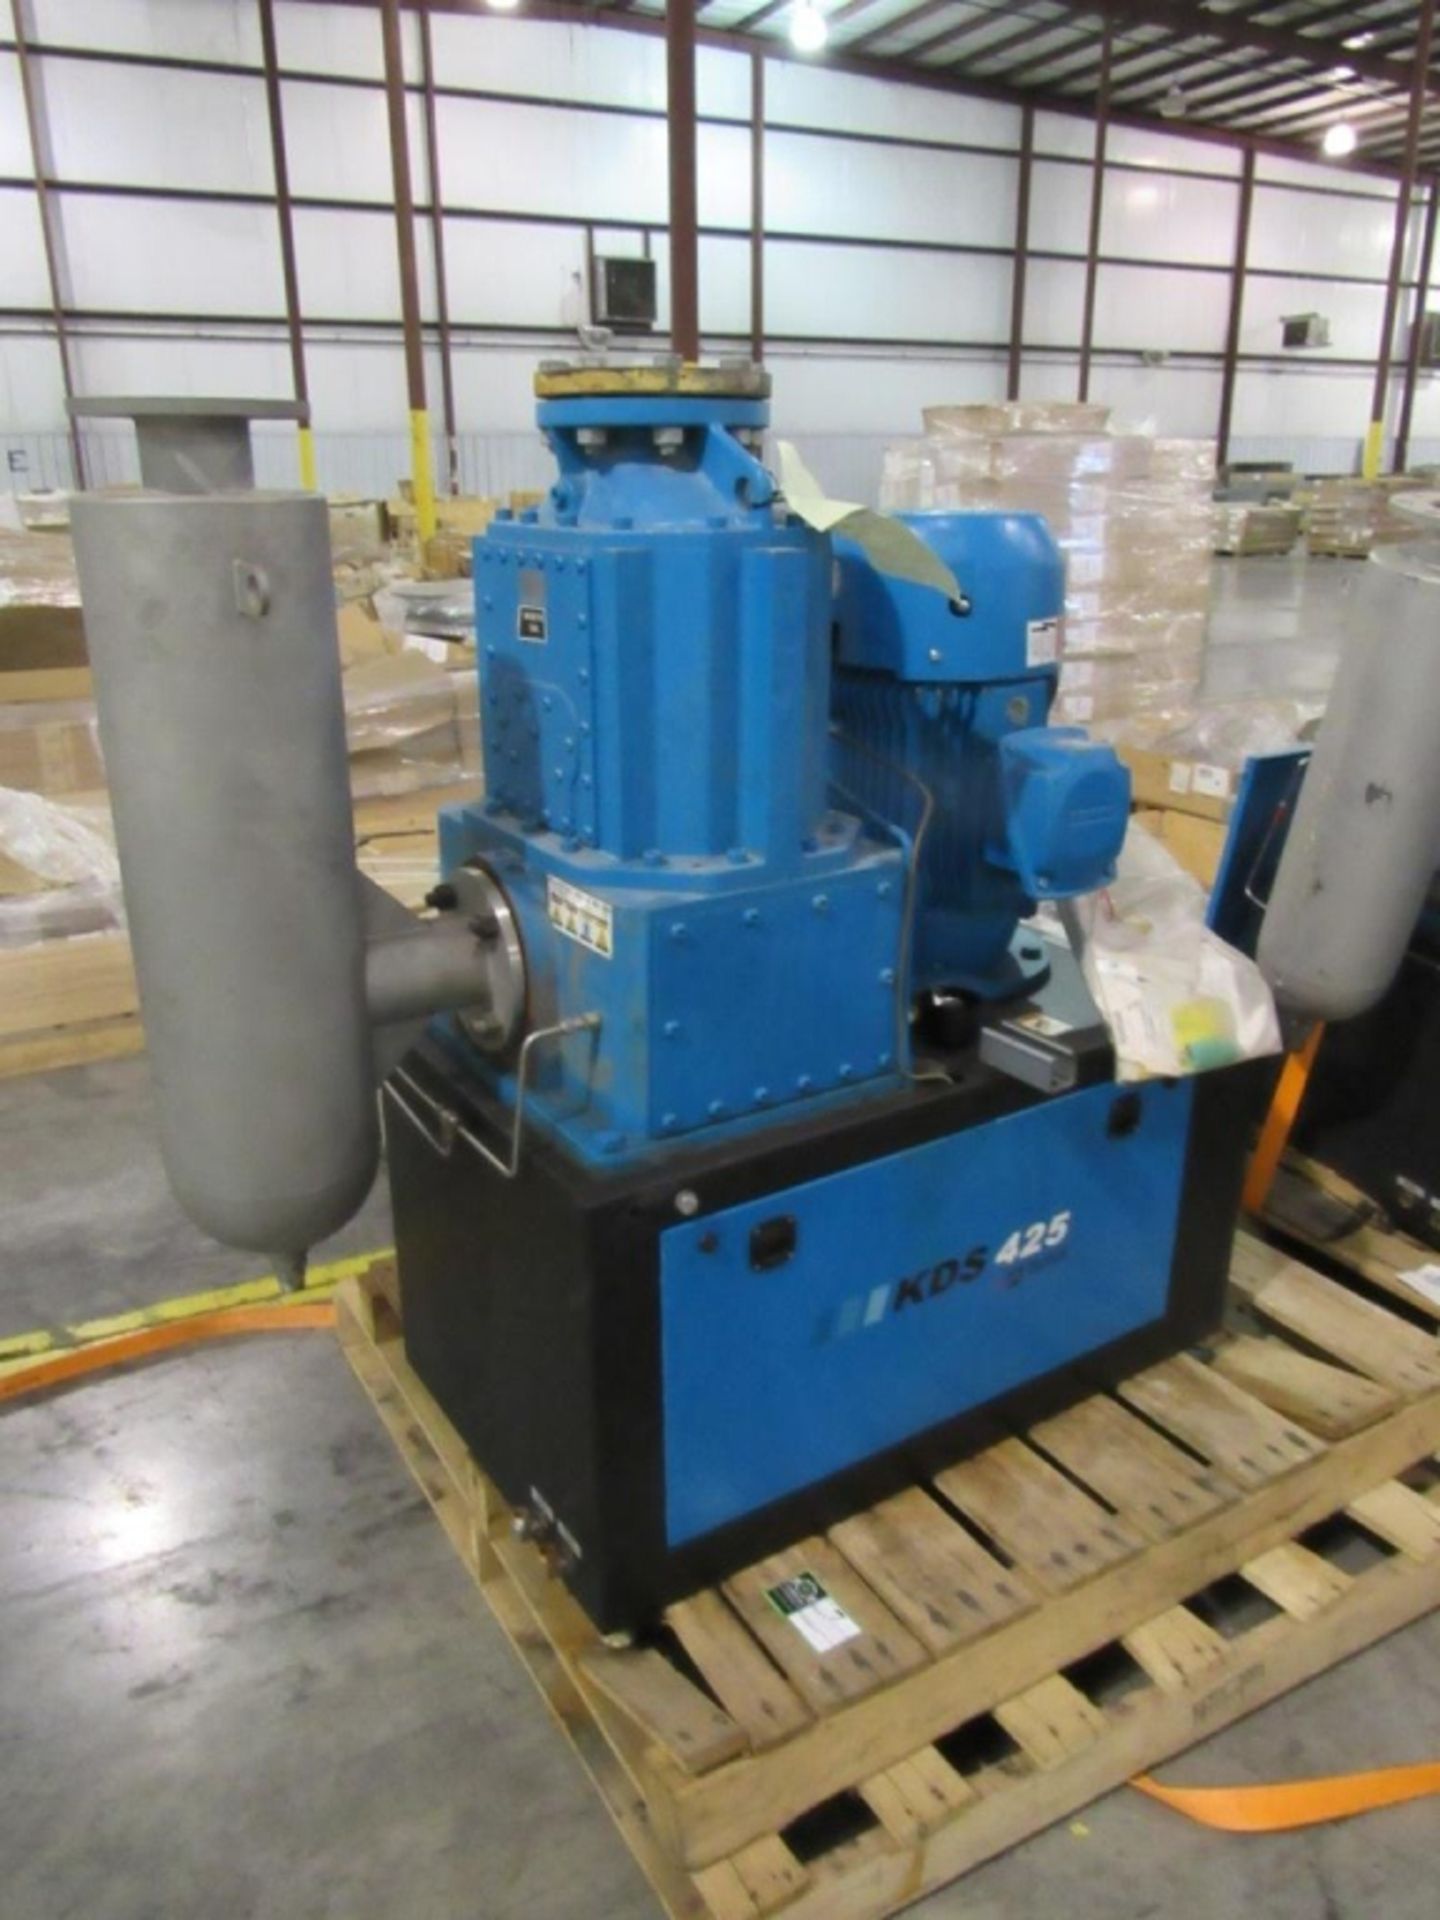 Tuthill KDS 425 Screw Vacuum Pump- ***Located in Cleveland, TN*** MFR - Tuthill Model - KDS 425